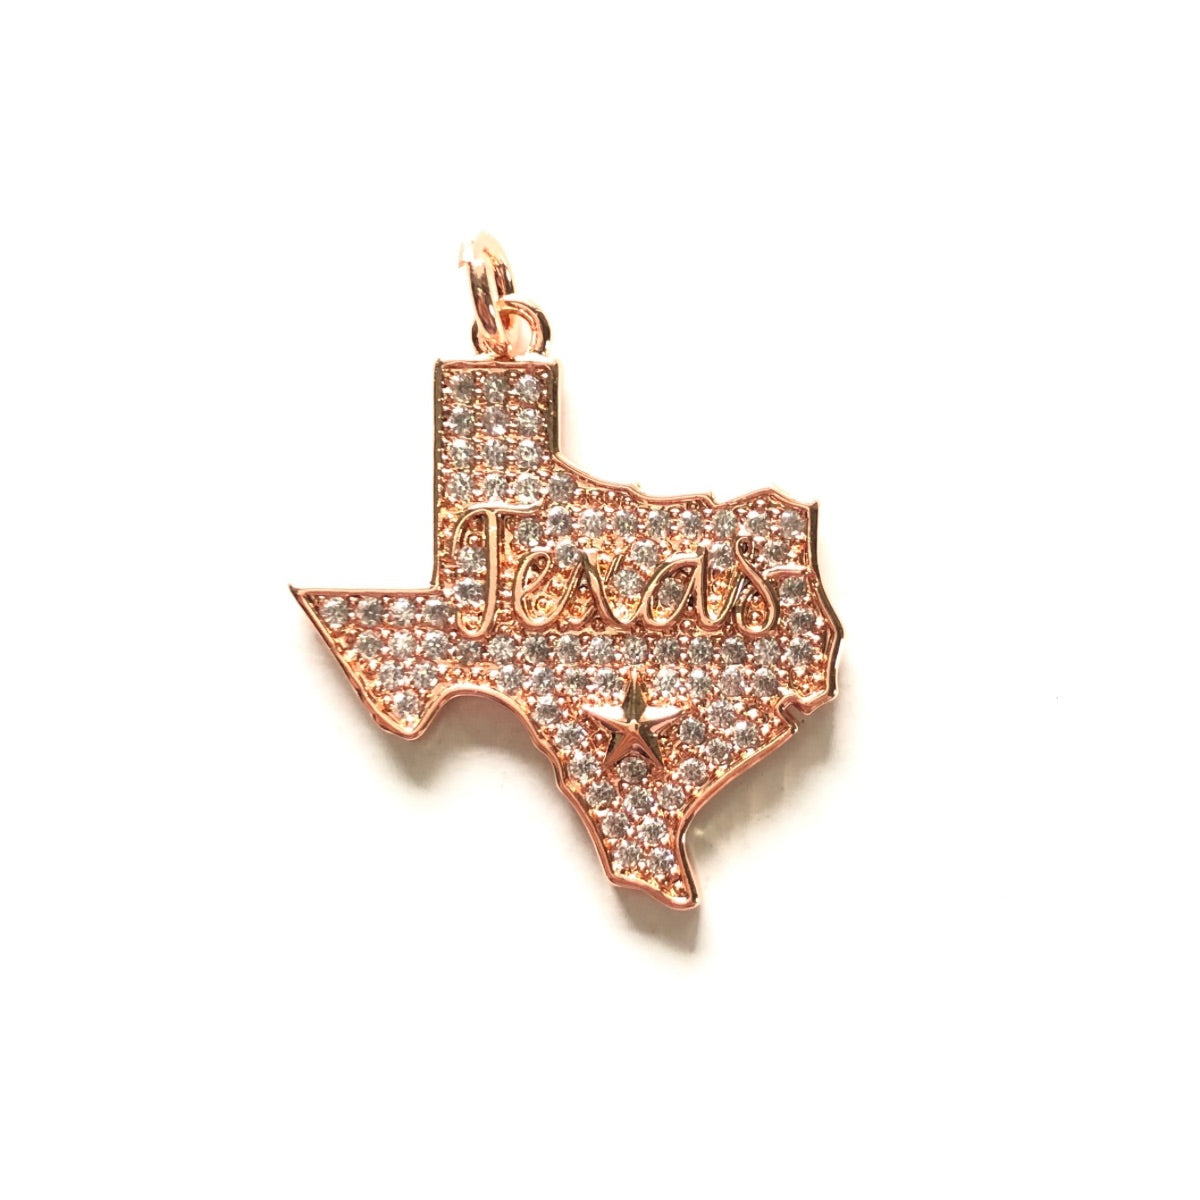 10pcs/lot 30*27mm CZ Lone Star State Texas Map Charm Pendants Rose Gold CZ Paved Charms Maps On Sale Charms Beads Beyond